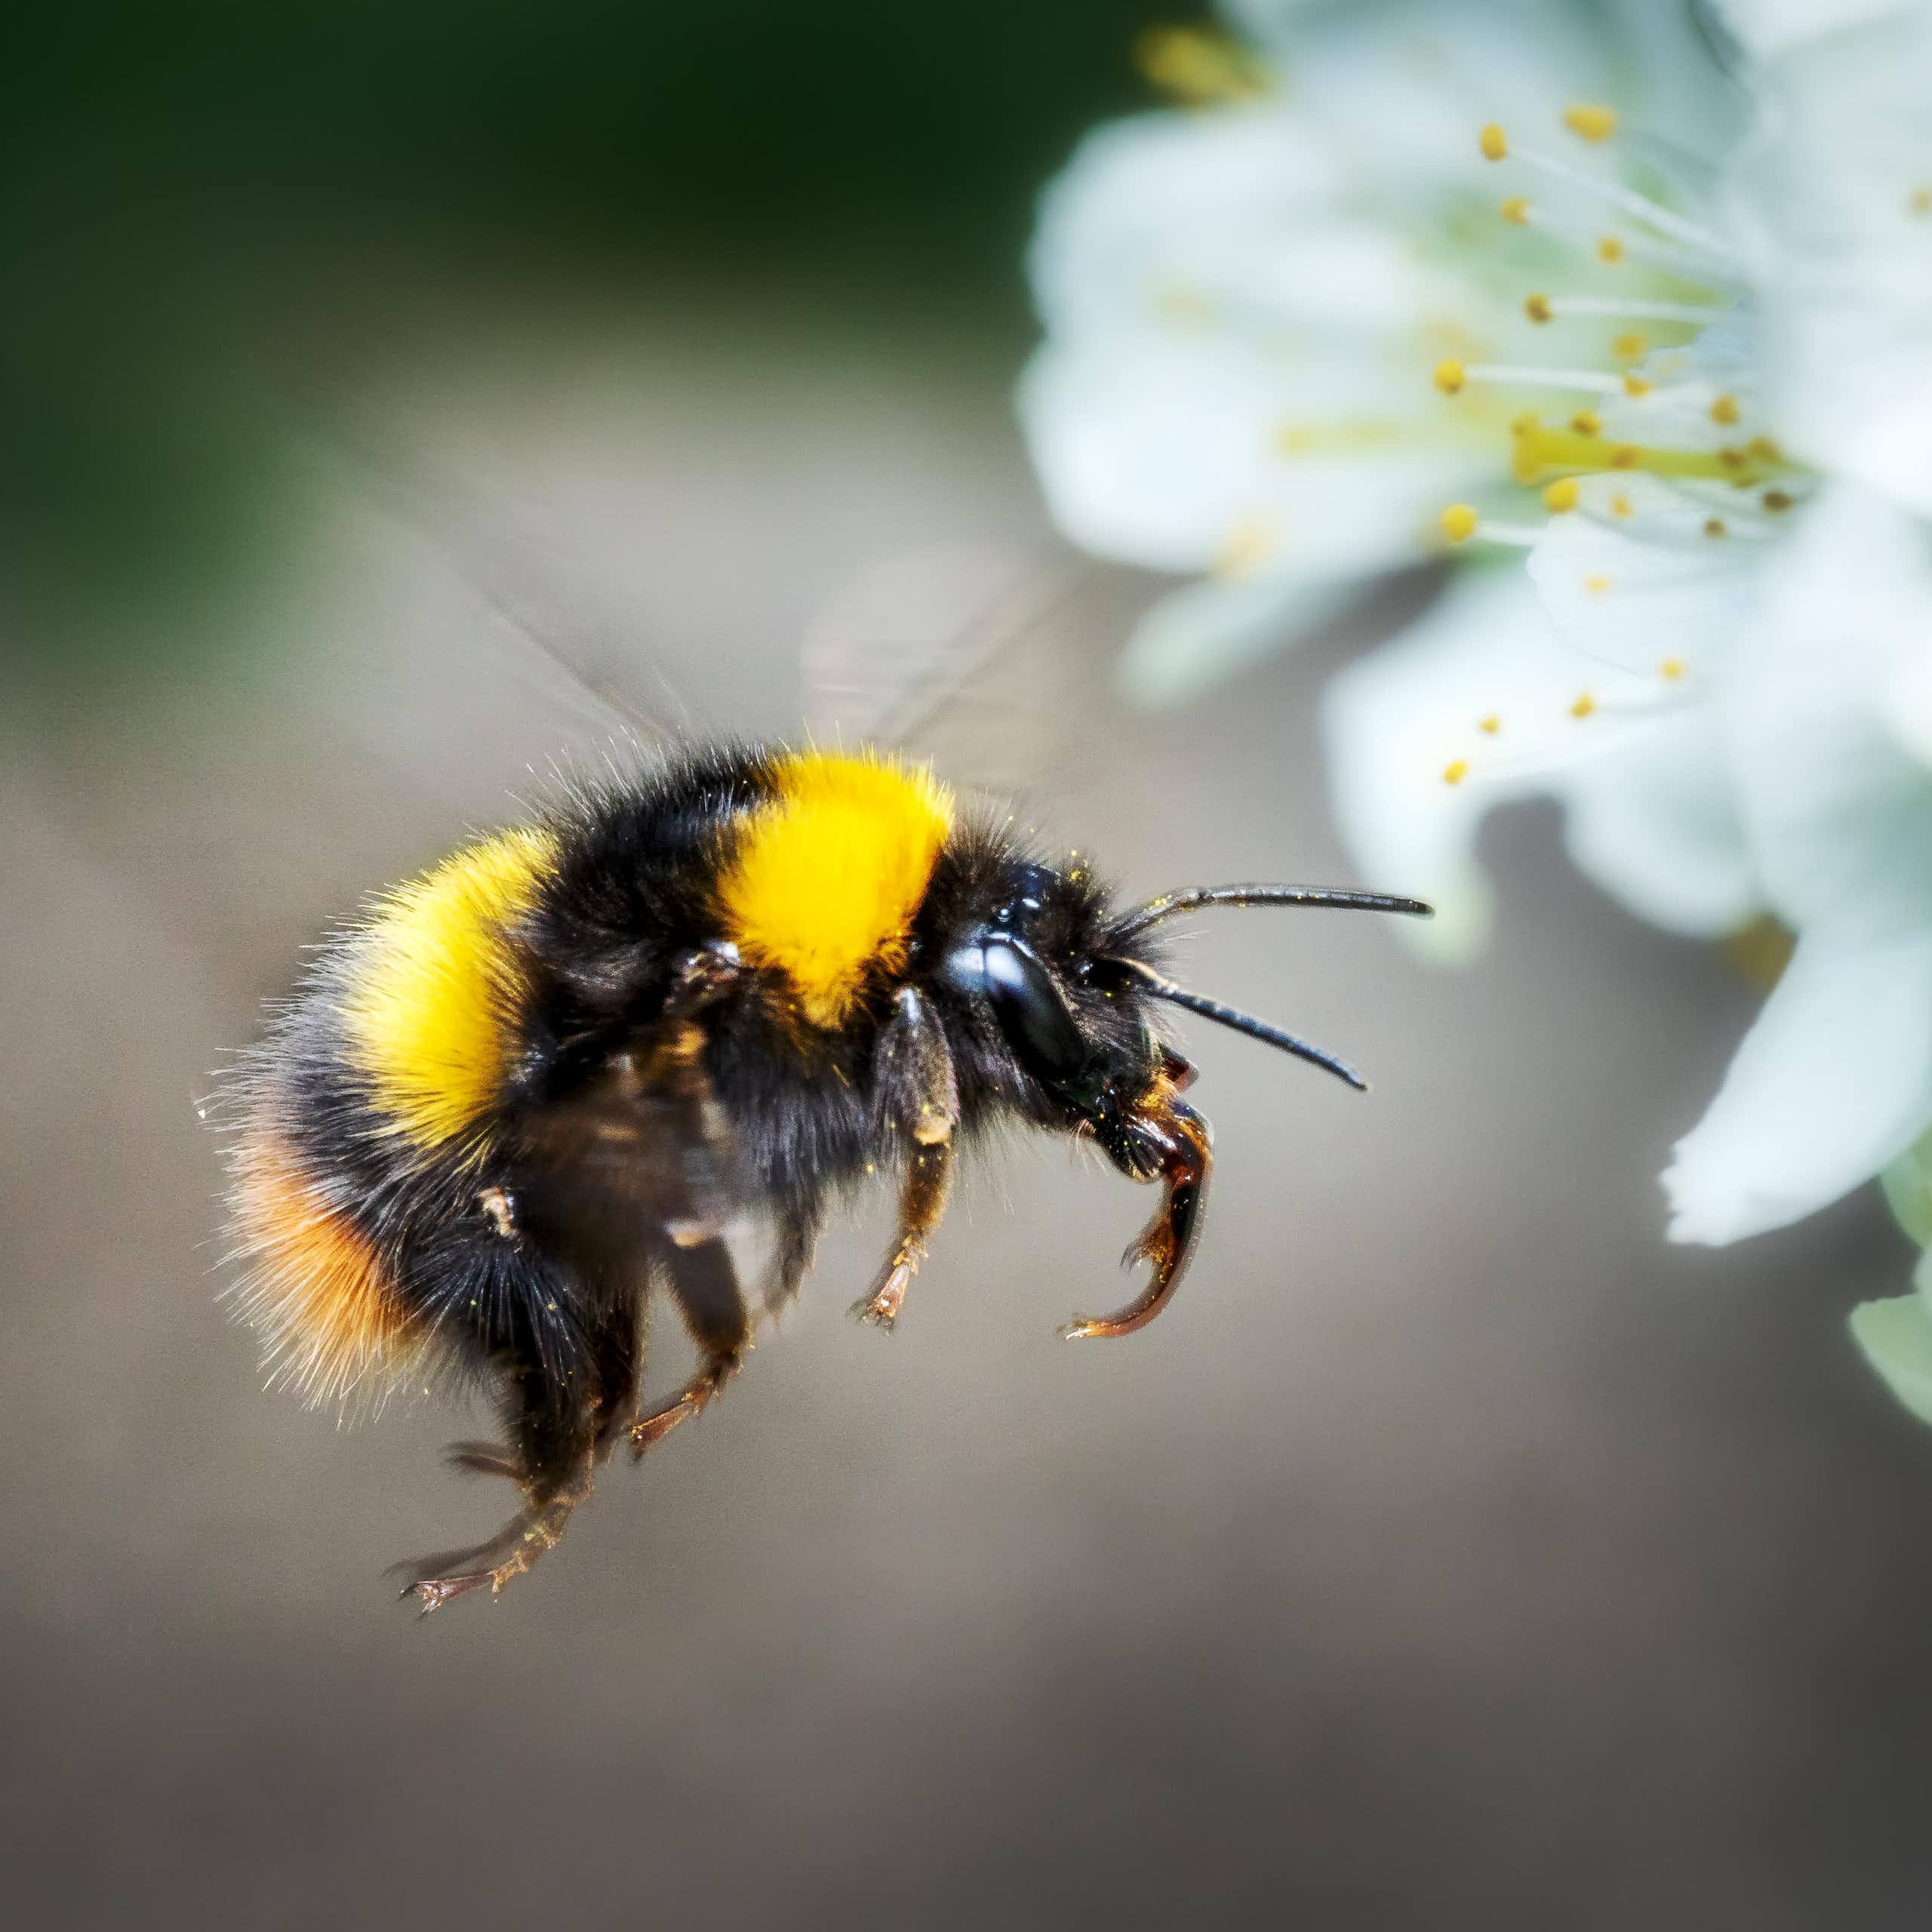 A bumblebee hovers by a white blossom.